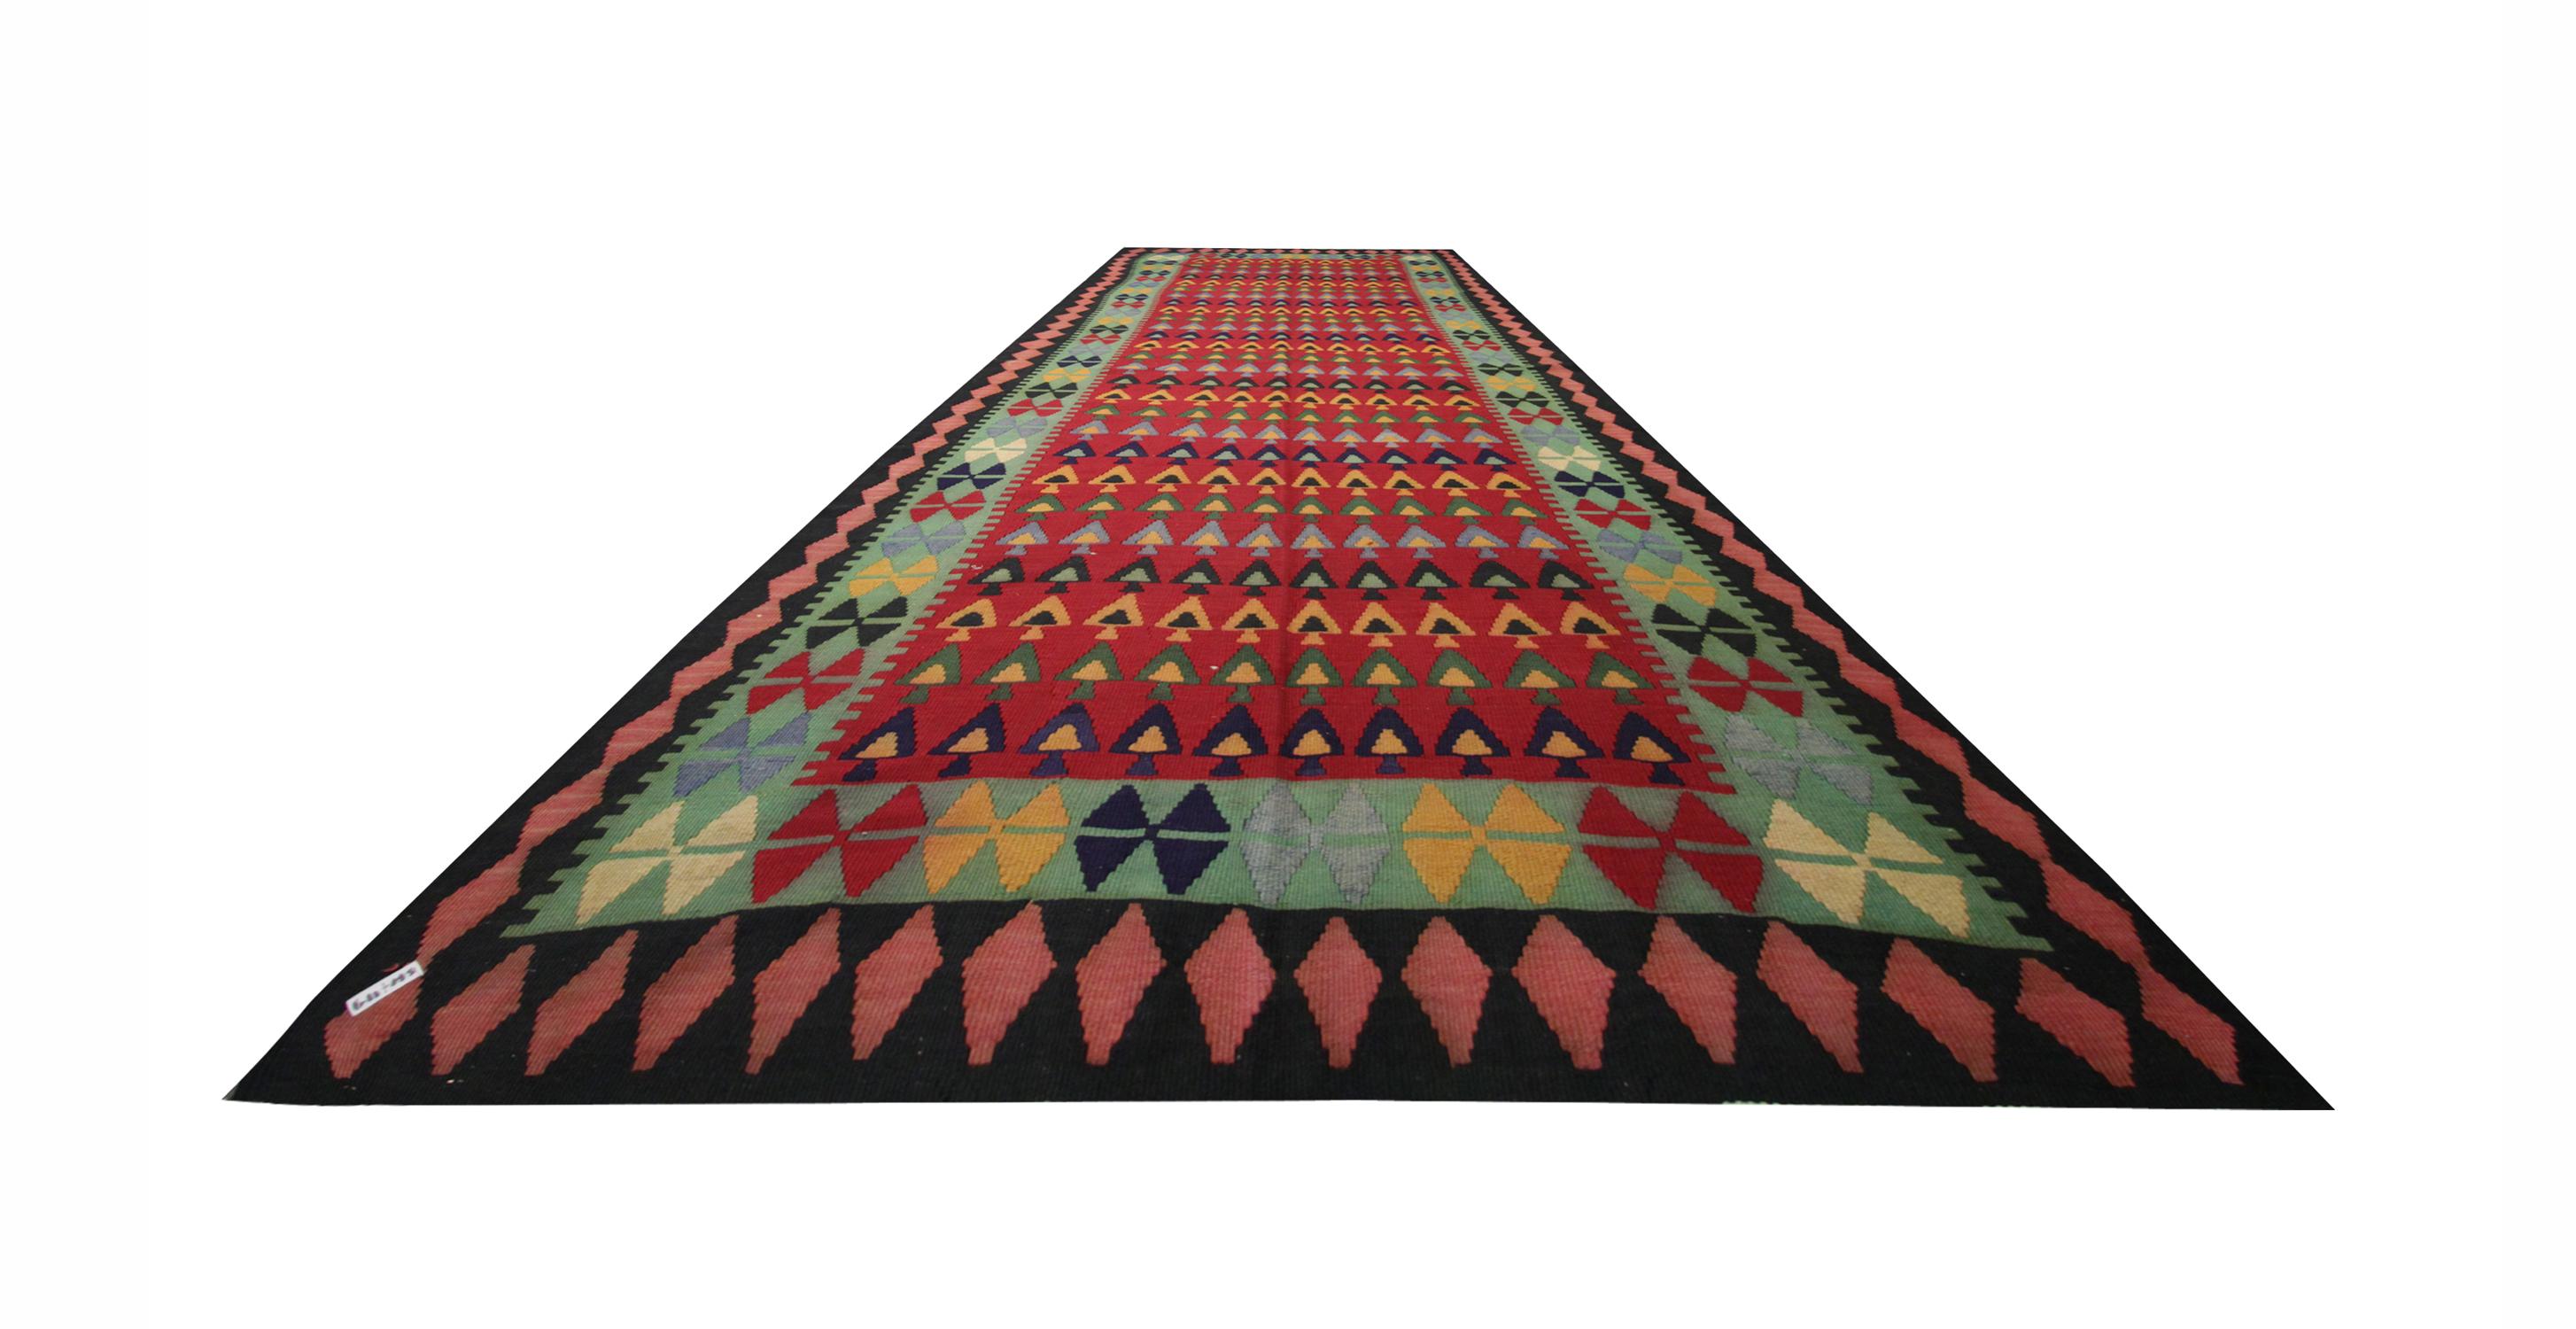 This fine wool handmade kilim was constructed in Azerbaijan in the 1960s/70s. The design features a rich red background with a bold repeating pattern in green, yellow, and blue accents. The central design has been framed with a repeating pattern